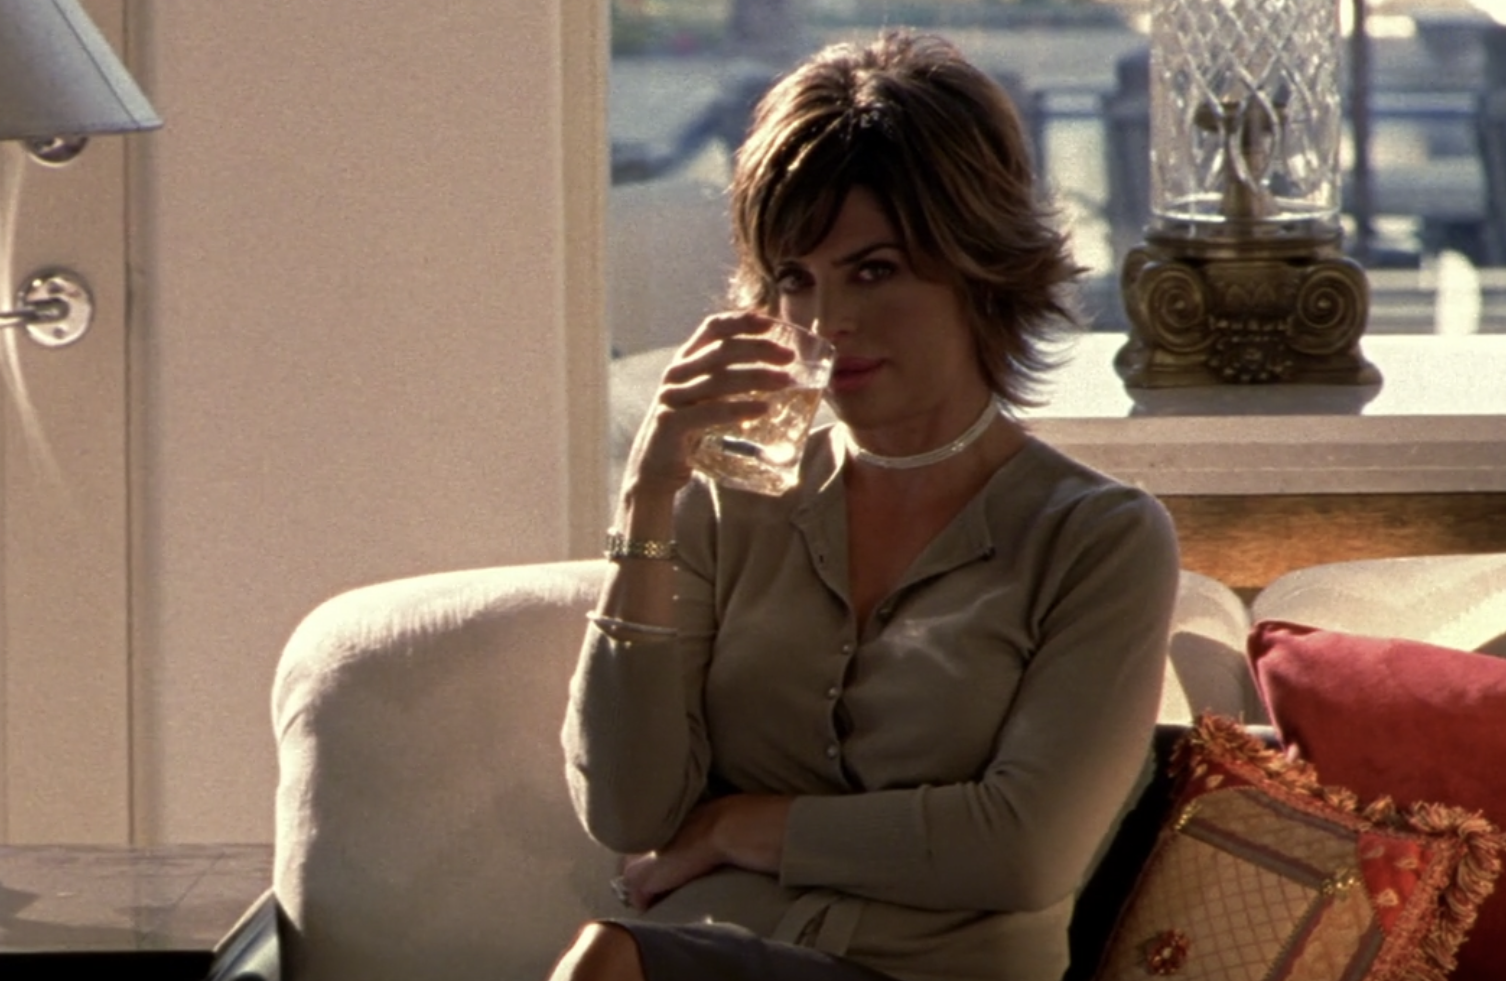 Screenshot from S1E6 of Veronica Mars. Lisa Rinna as Lynn Echolls is sitting on a white couch. Beside her are colorful pillows. She has one arm across her stomach and in her other hand she's holding a glass of brown liquor up to her mouth and staring directly into the camera.